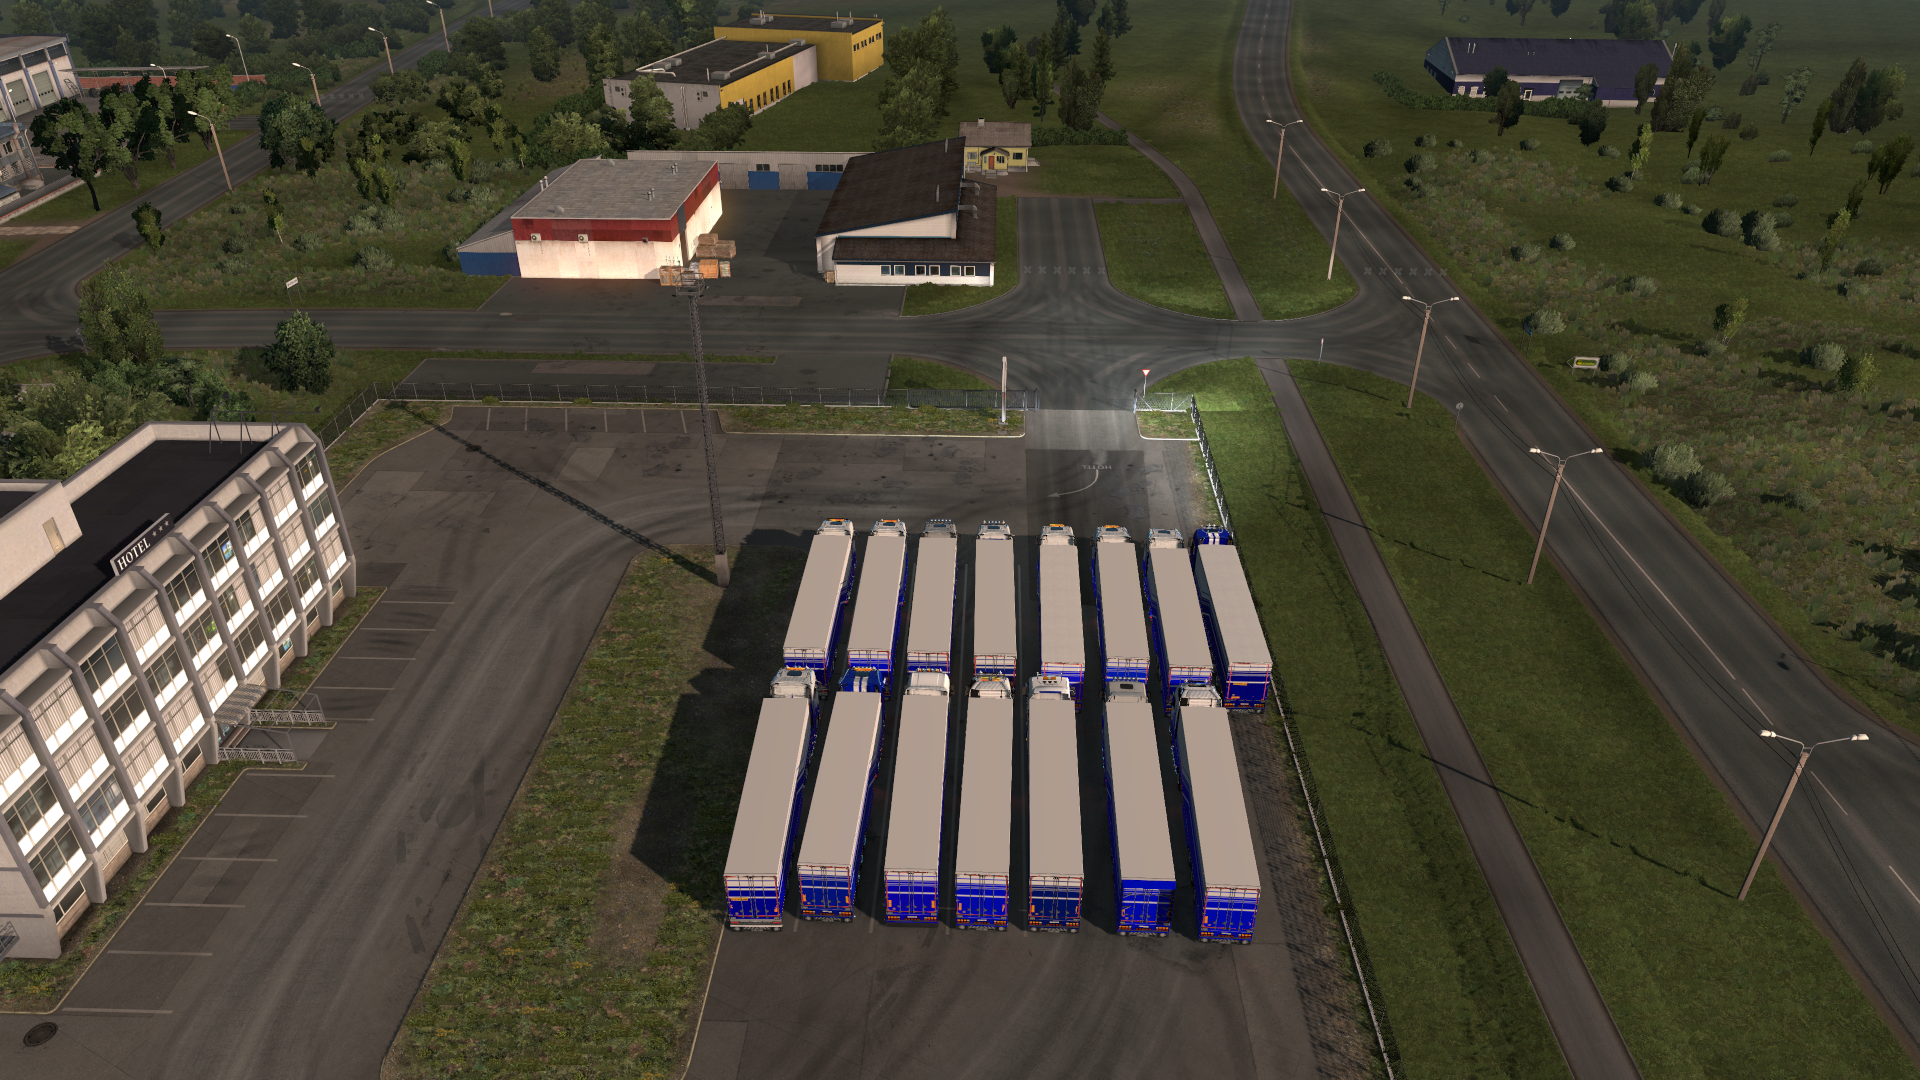 ets2_20200522_224546_00.png